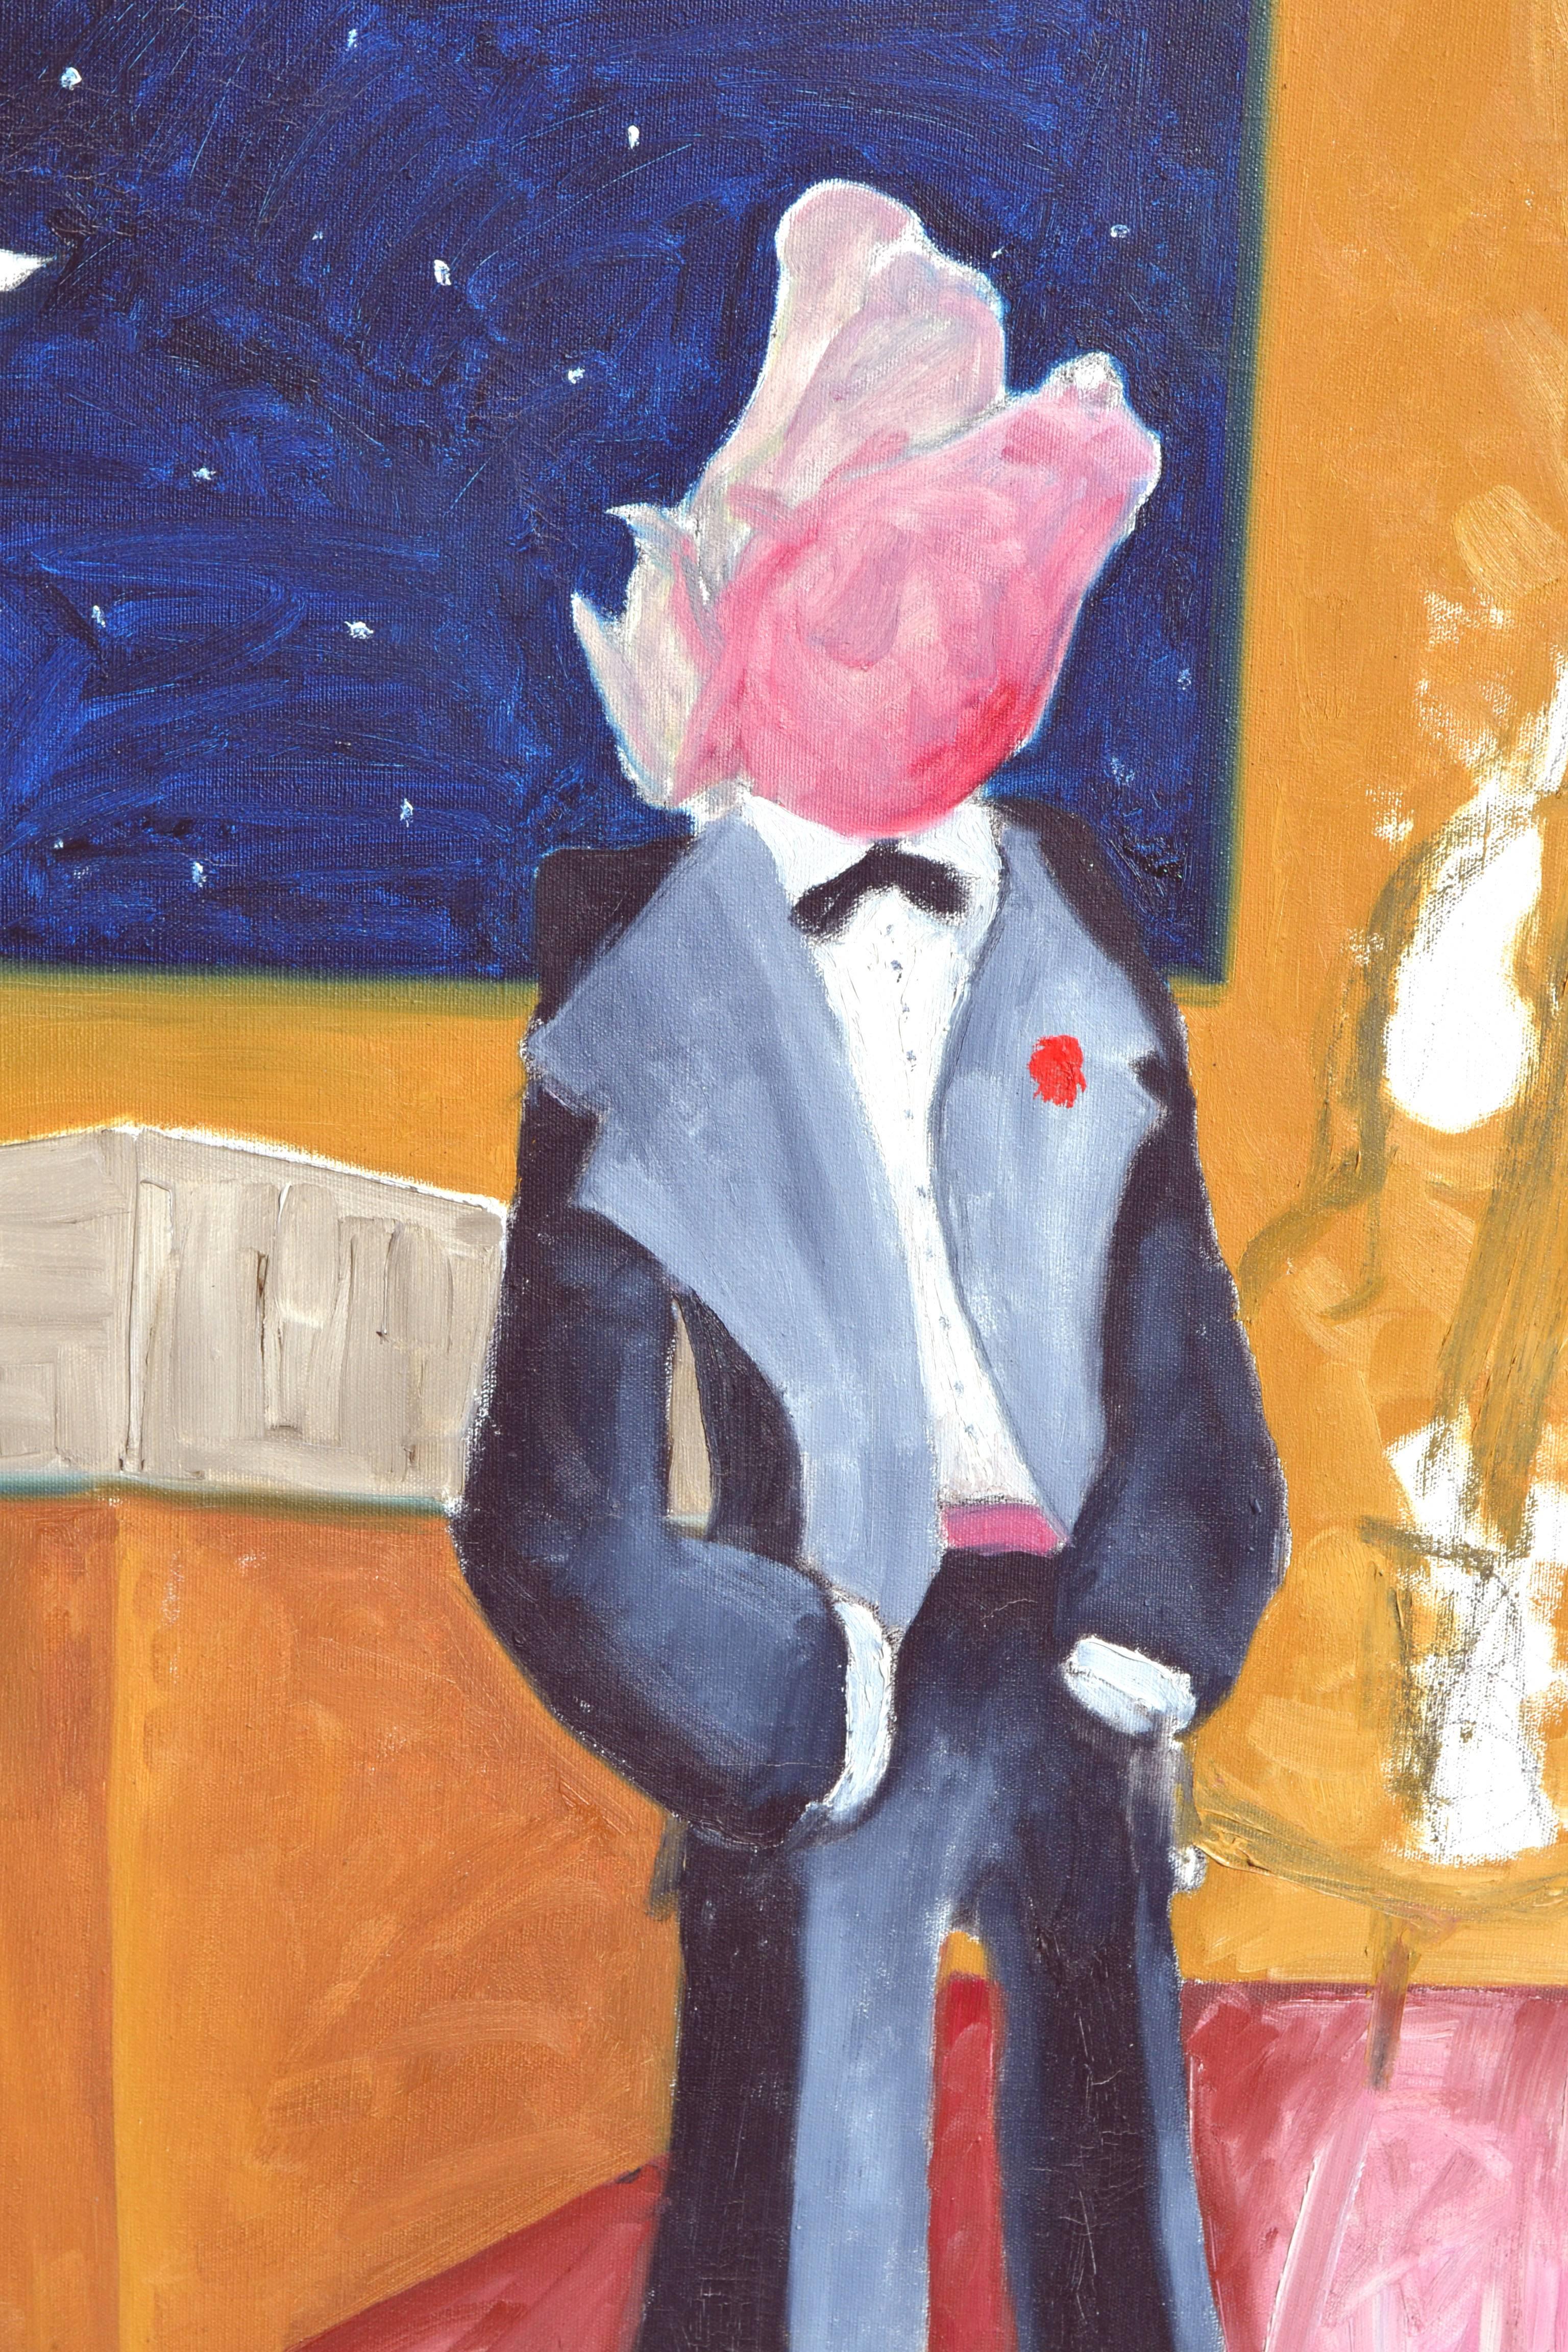 Singing At the Moon, Wolf in a Tux - Abstract Figurative  - Painting by G. Lester